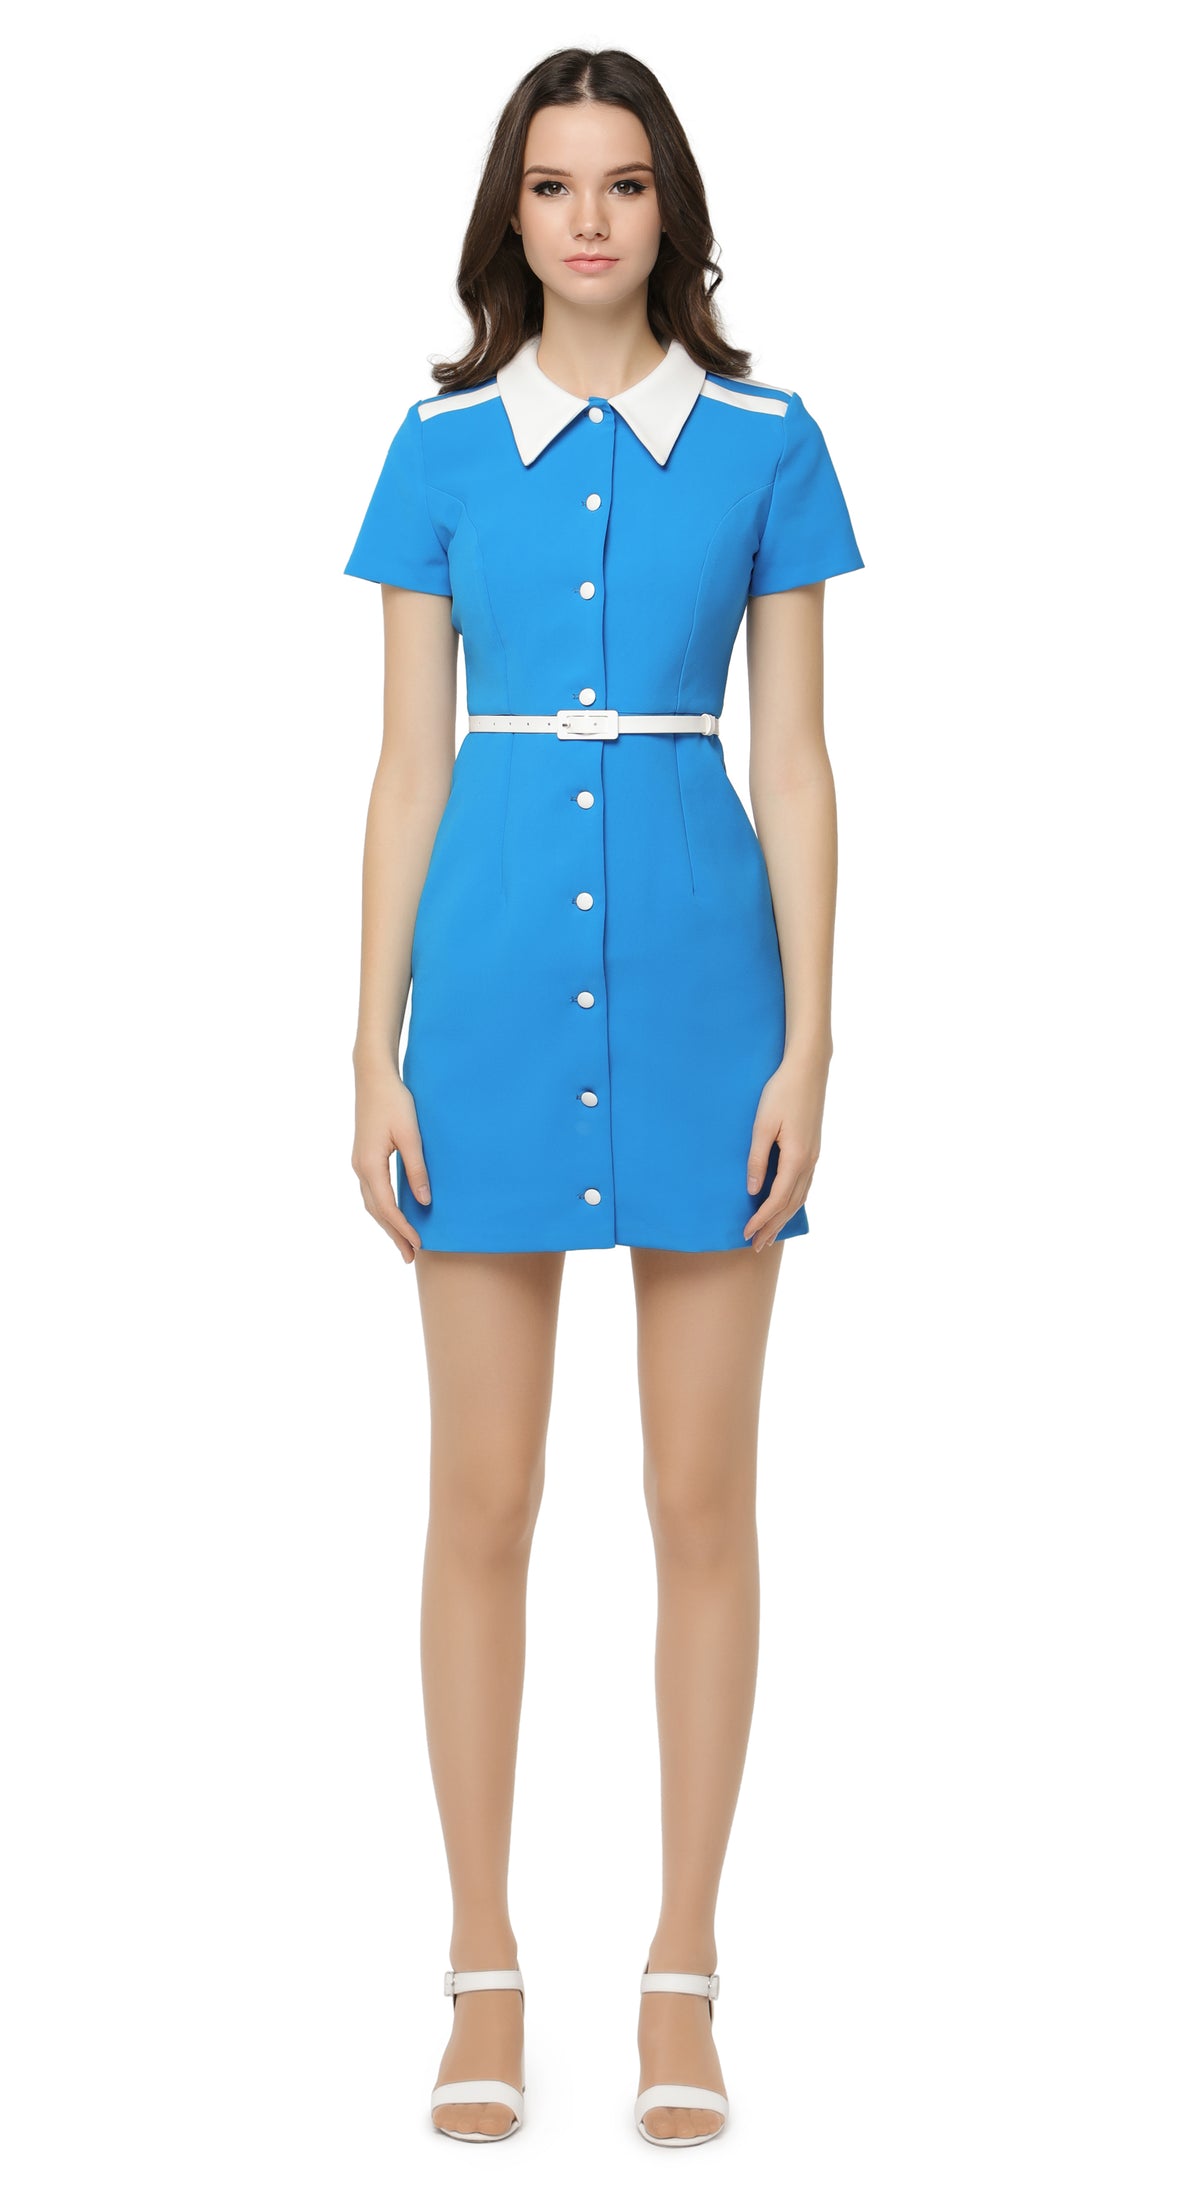 Fitted button down retro Americana spring dress with short sleeves and a uniform inspired silhouette. Shoulder stripe detailing, classic shirt collar and detachable belt. A confident, easy to wear any occasion go-to dress for big nights out with heels or as a comfy effortless entrance maker knocking about the city in kicks.  Choose bespoke for custom measurements, to alternate colour, to amend sleeve and/or hem length.